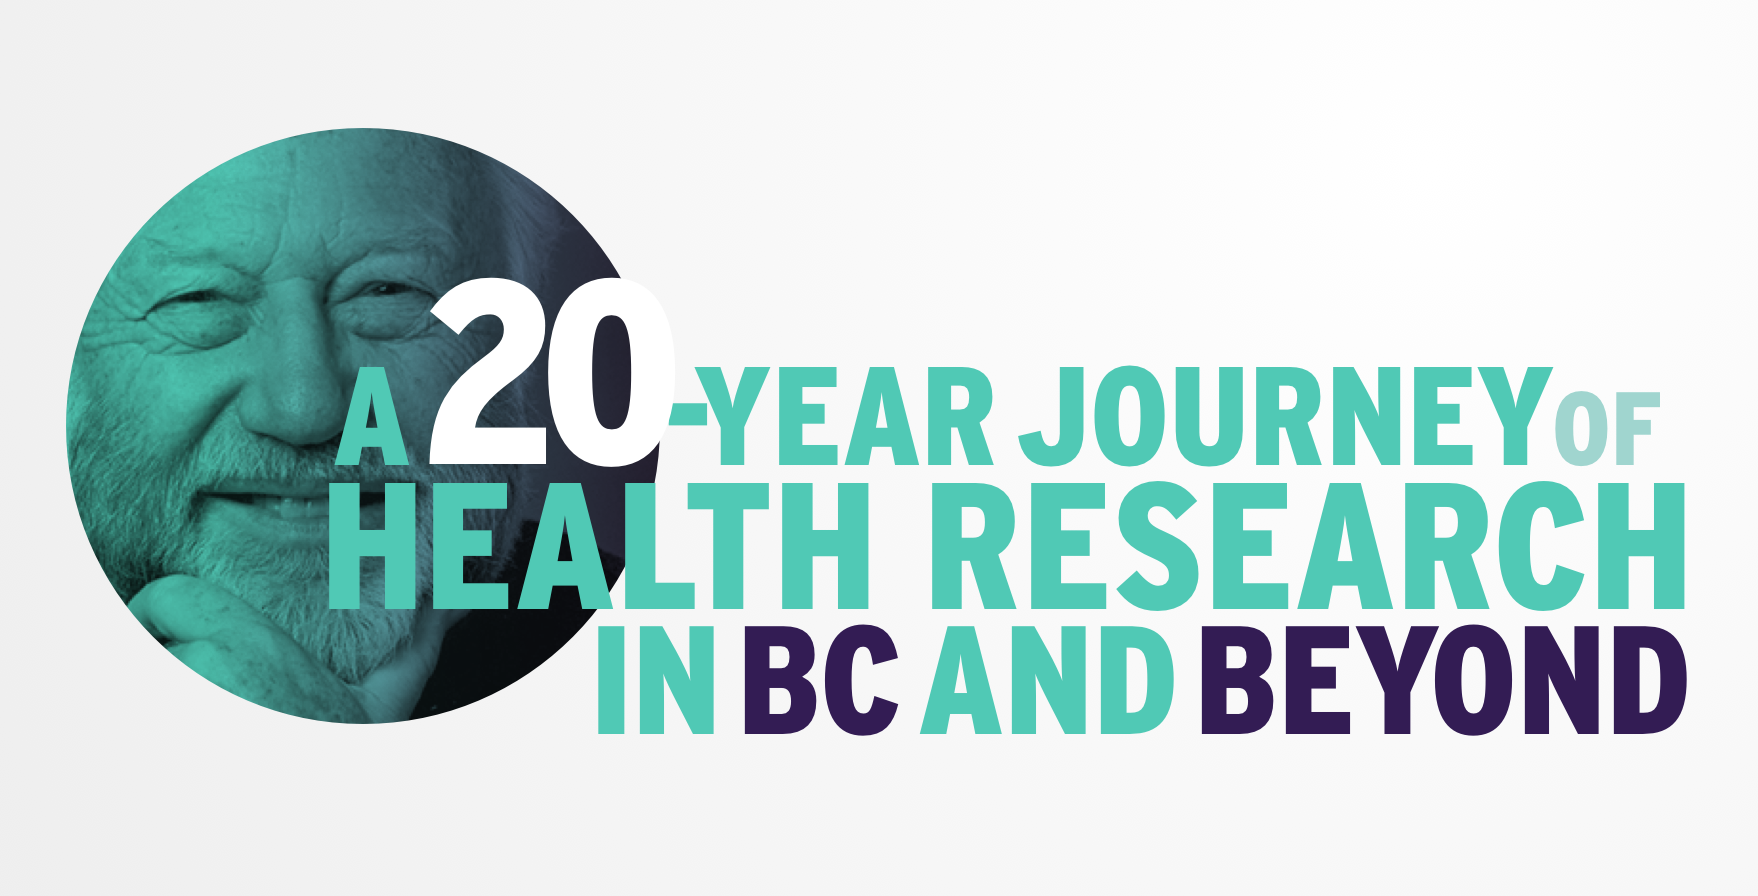 A 20-year journey of health research in BC: 20 years, 20 stories